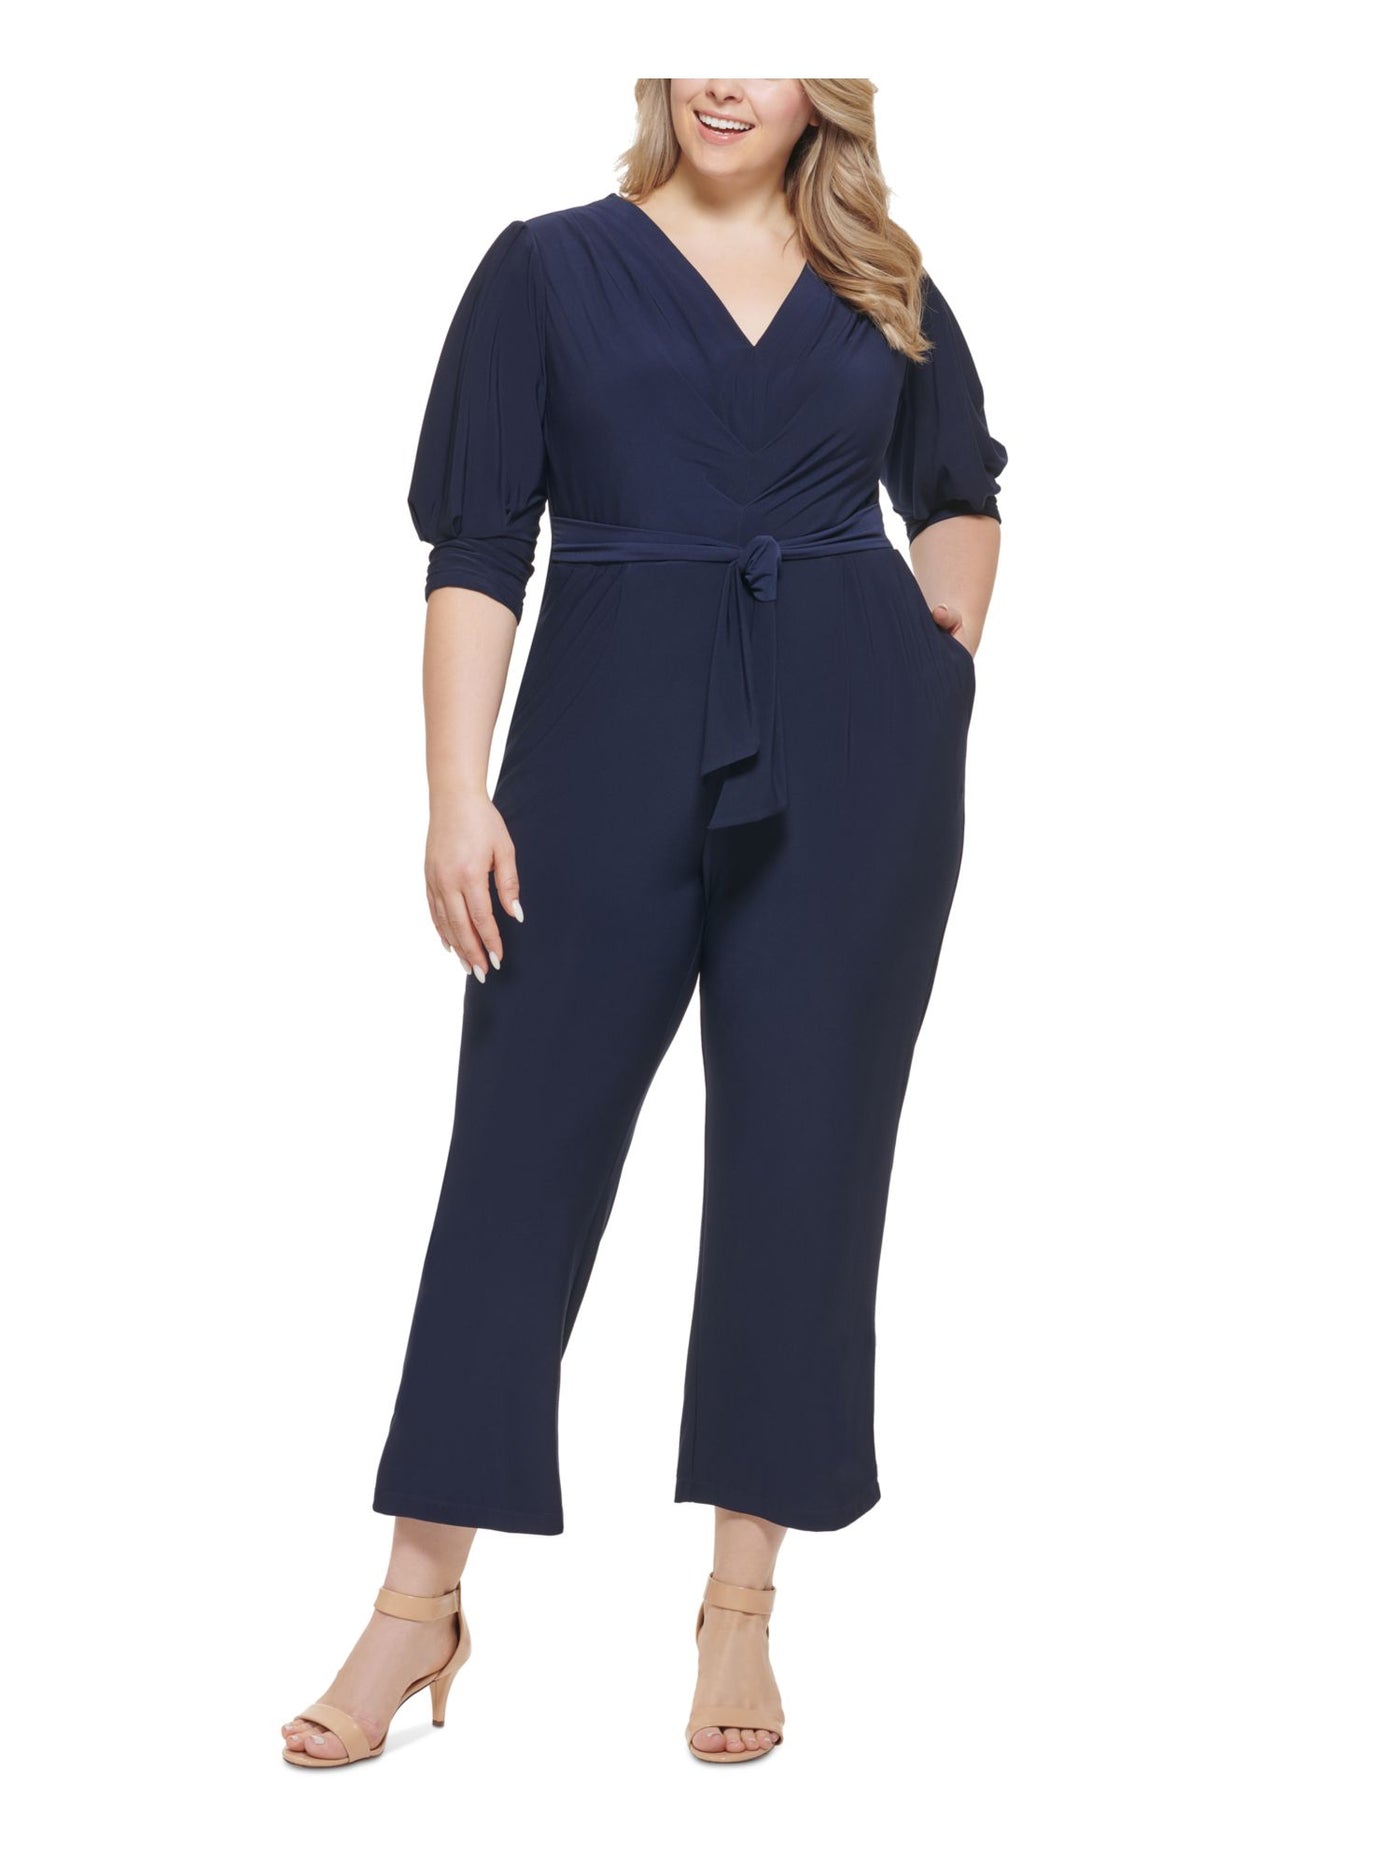 VINCE CAMUTO Womens Navy Pocketed Zippered Tie Front Ruched 3/4 Sleeve V Neck Straight leg Jumpsuit Plus 24W